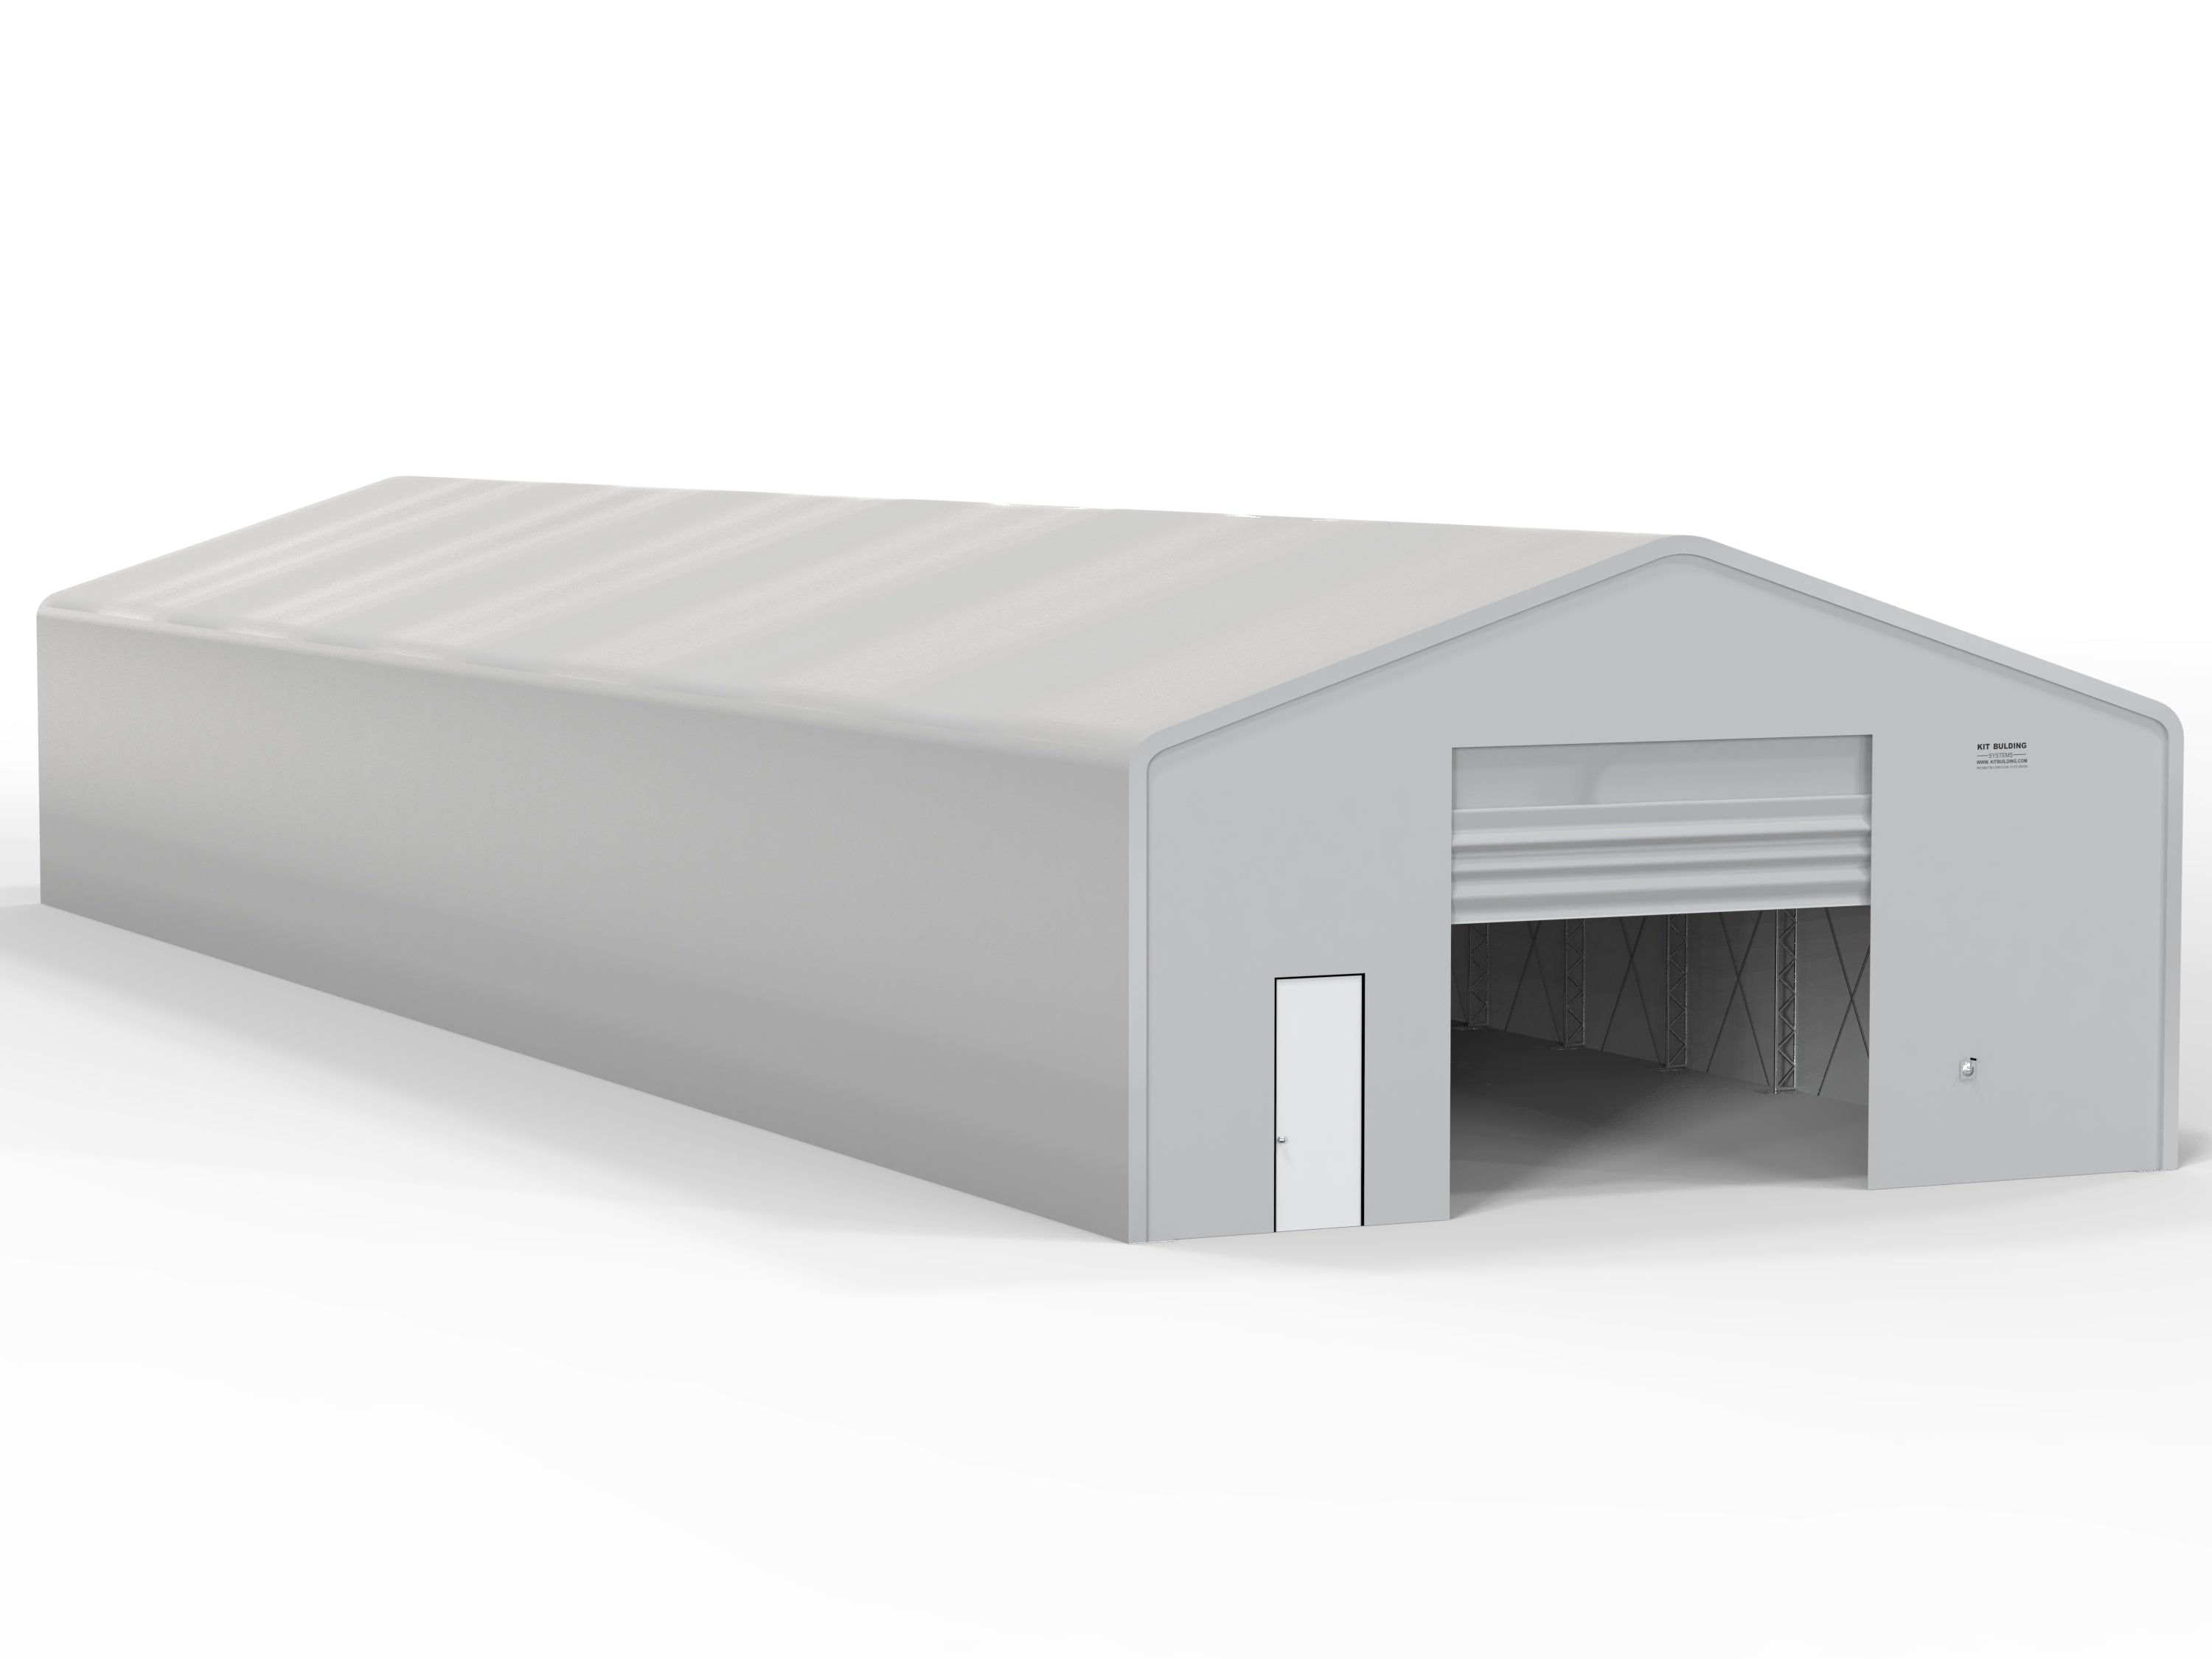 Double Truss PVC temporary storage building - Grey - Winch operated PVC Shutter